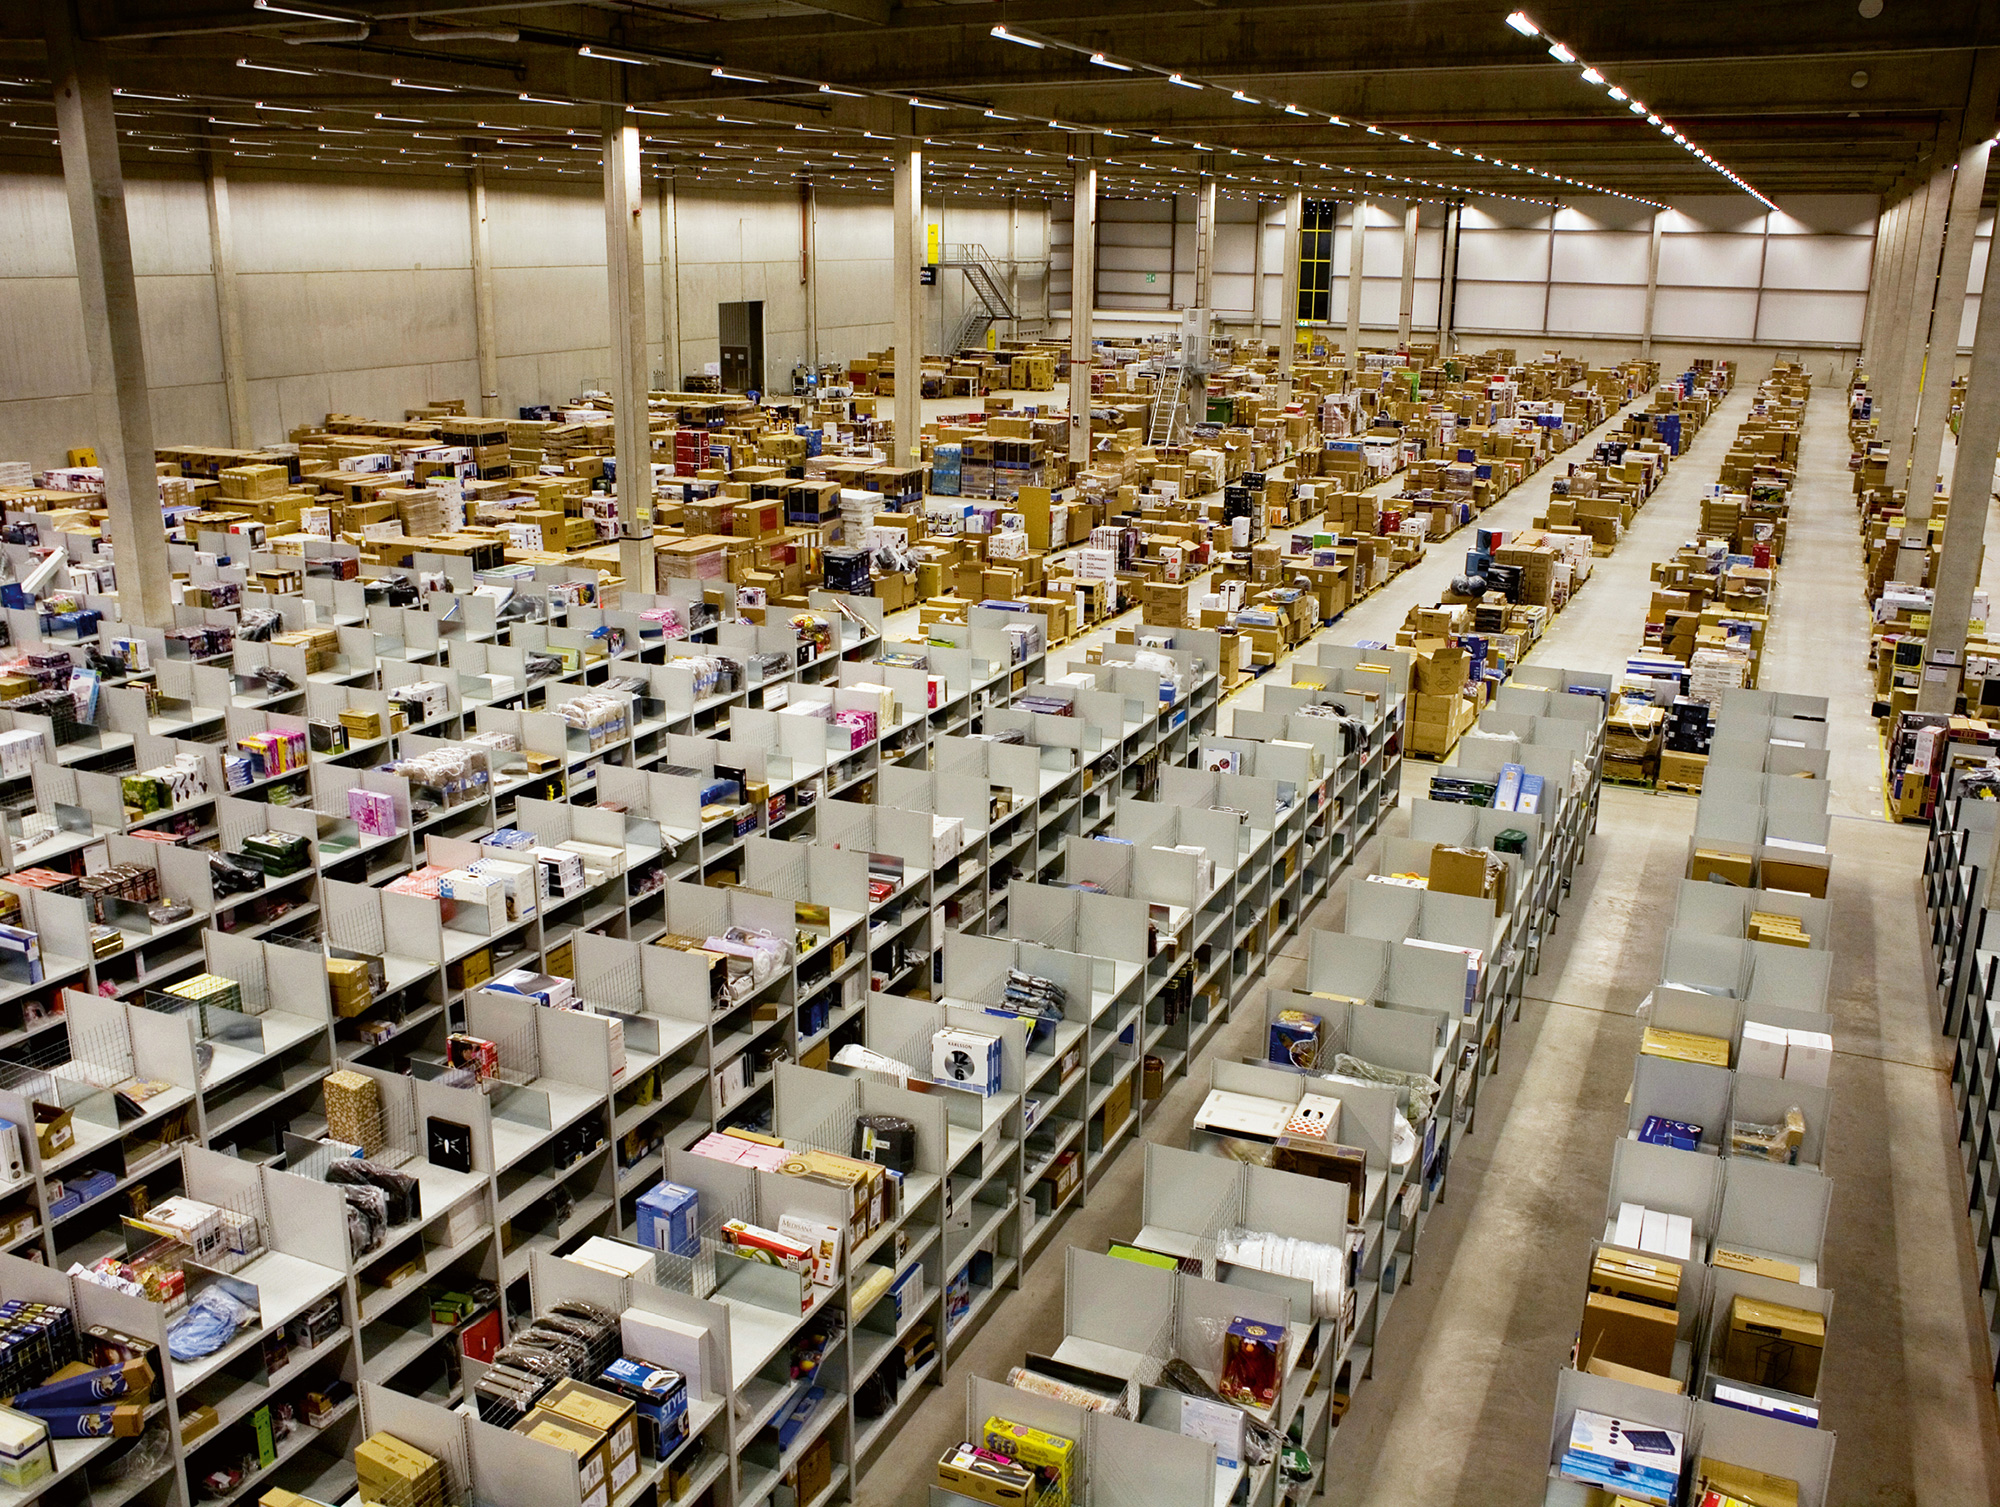 Gareth Phillips’s photograph of Amazon’s distribution center in Swansea, which covers more than 800,000 square feet.